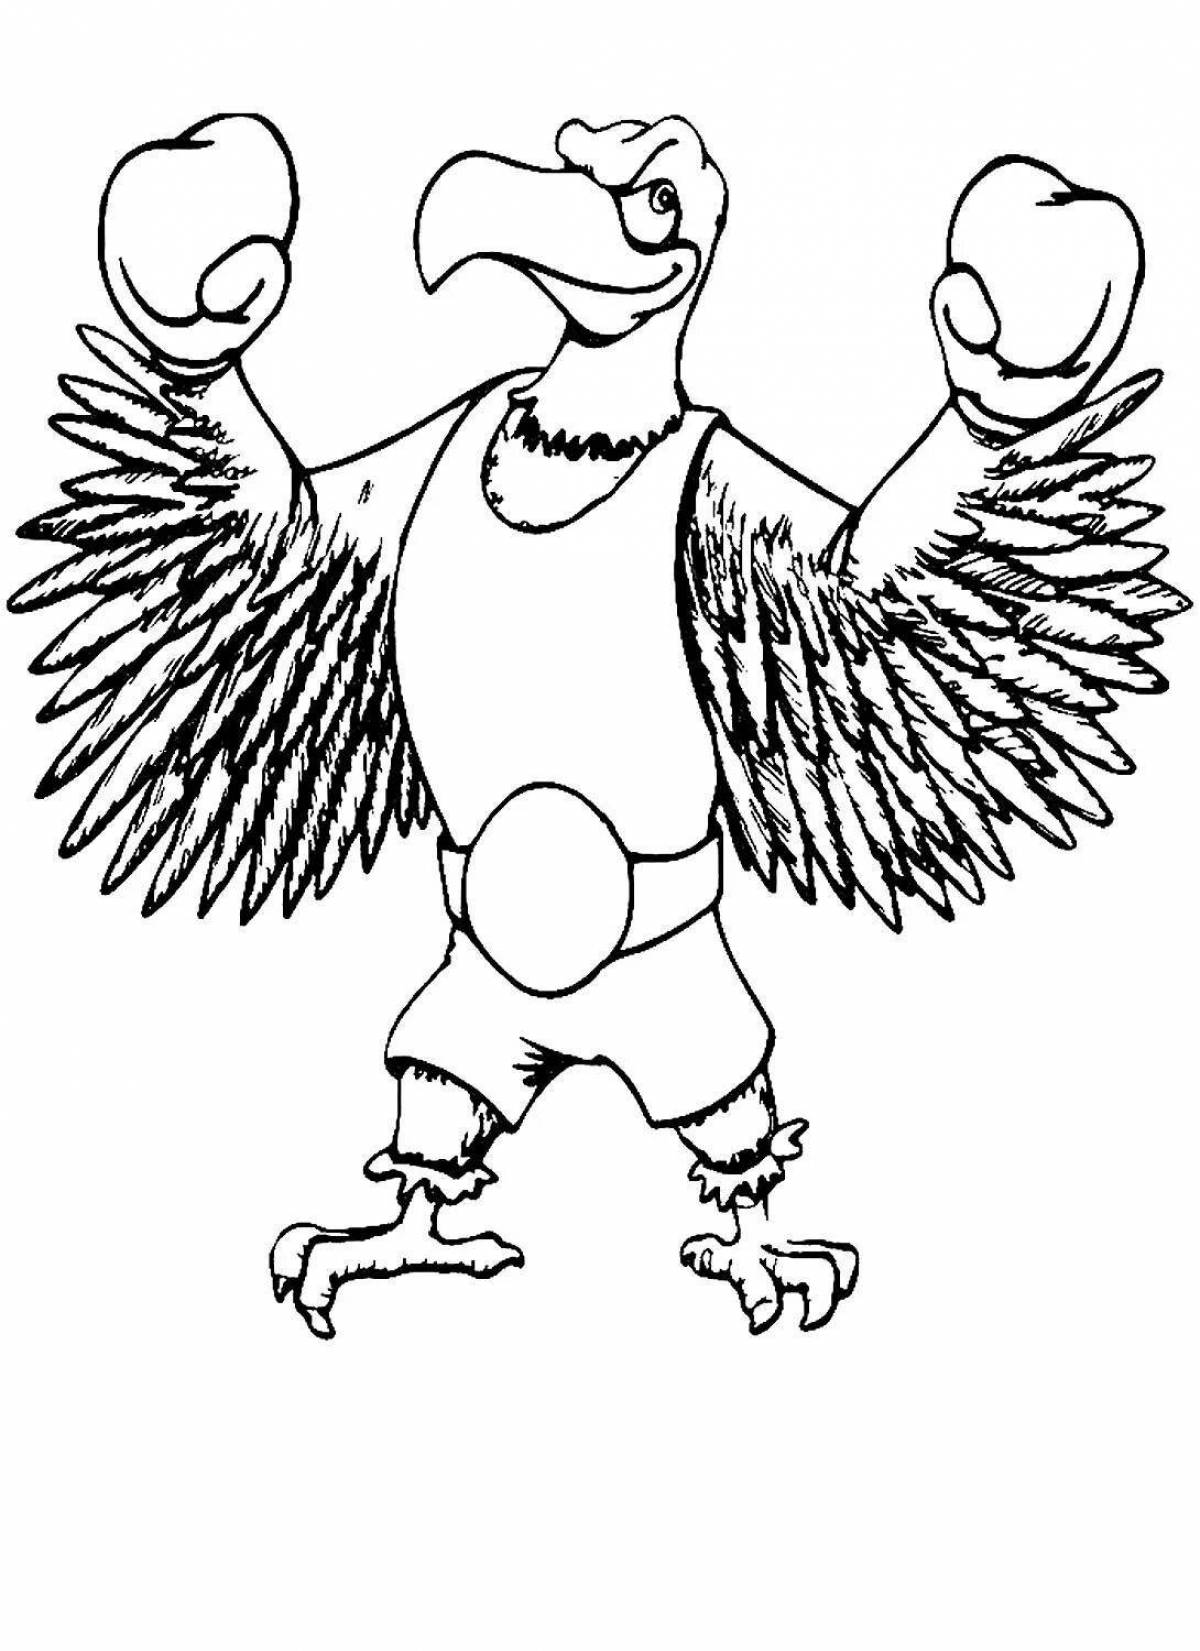 Coloring book shiny eaglet